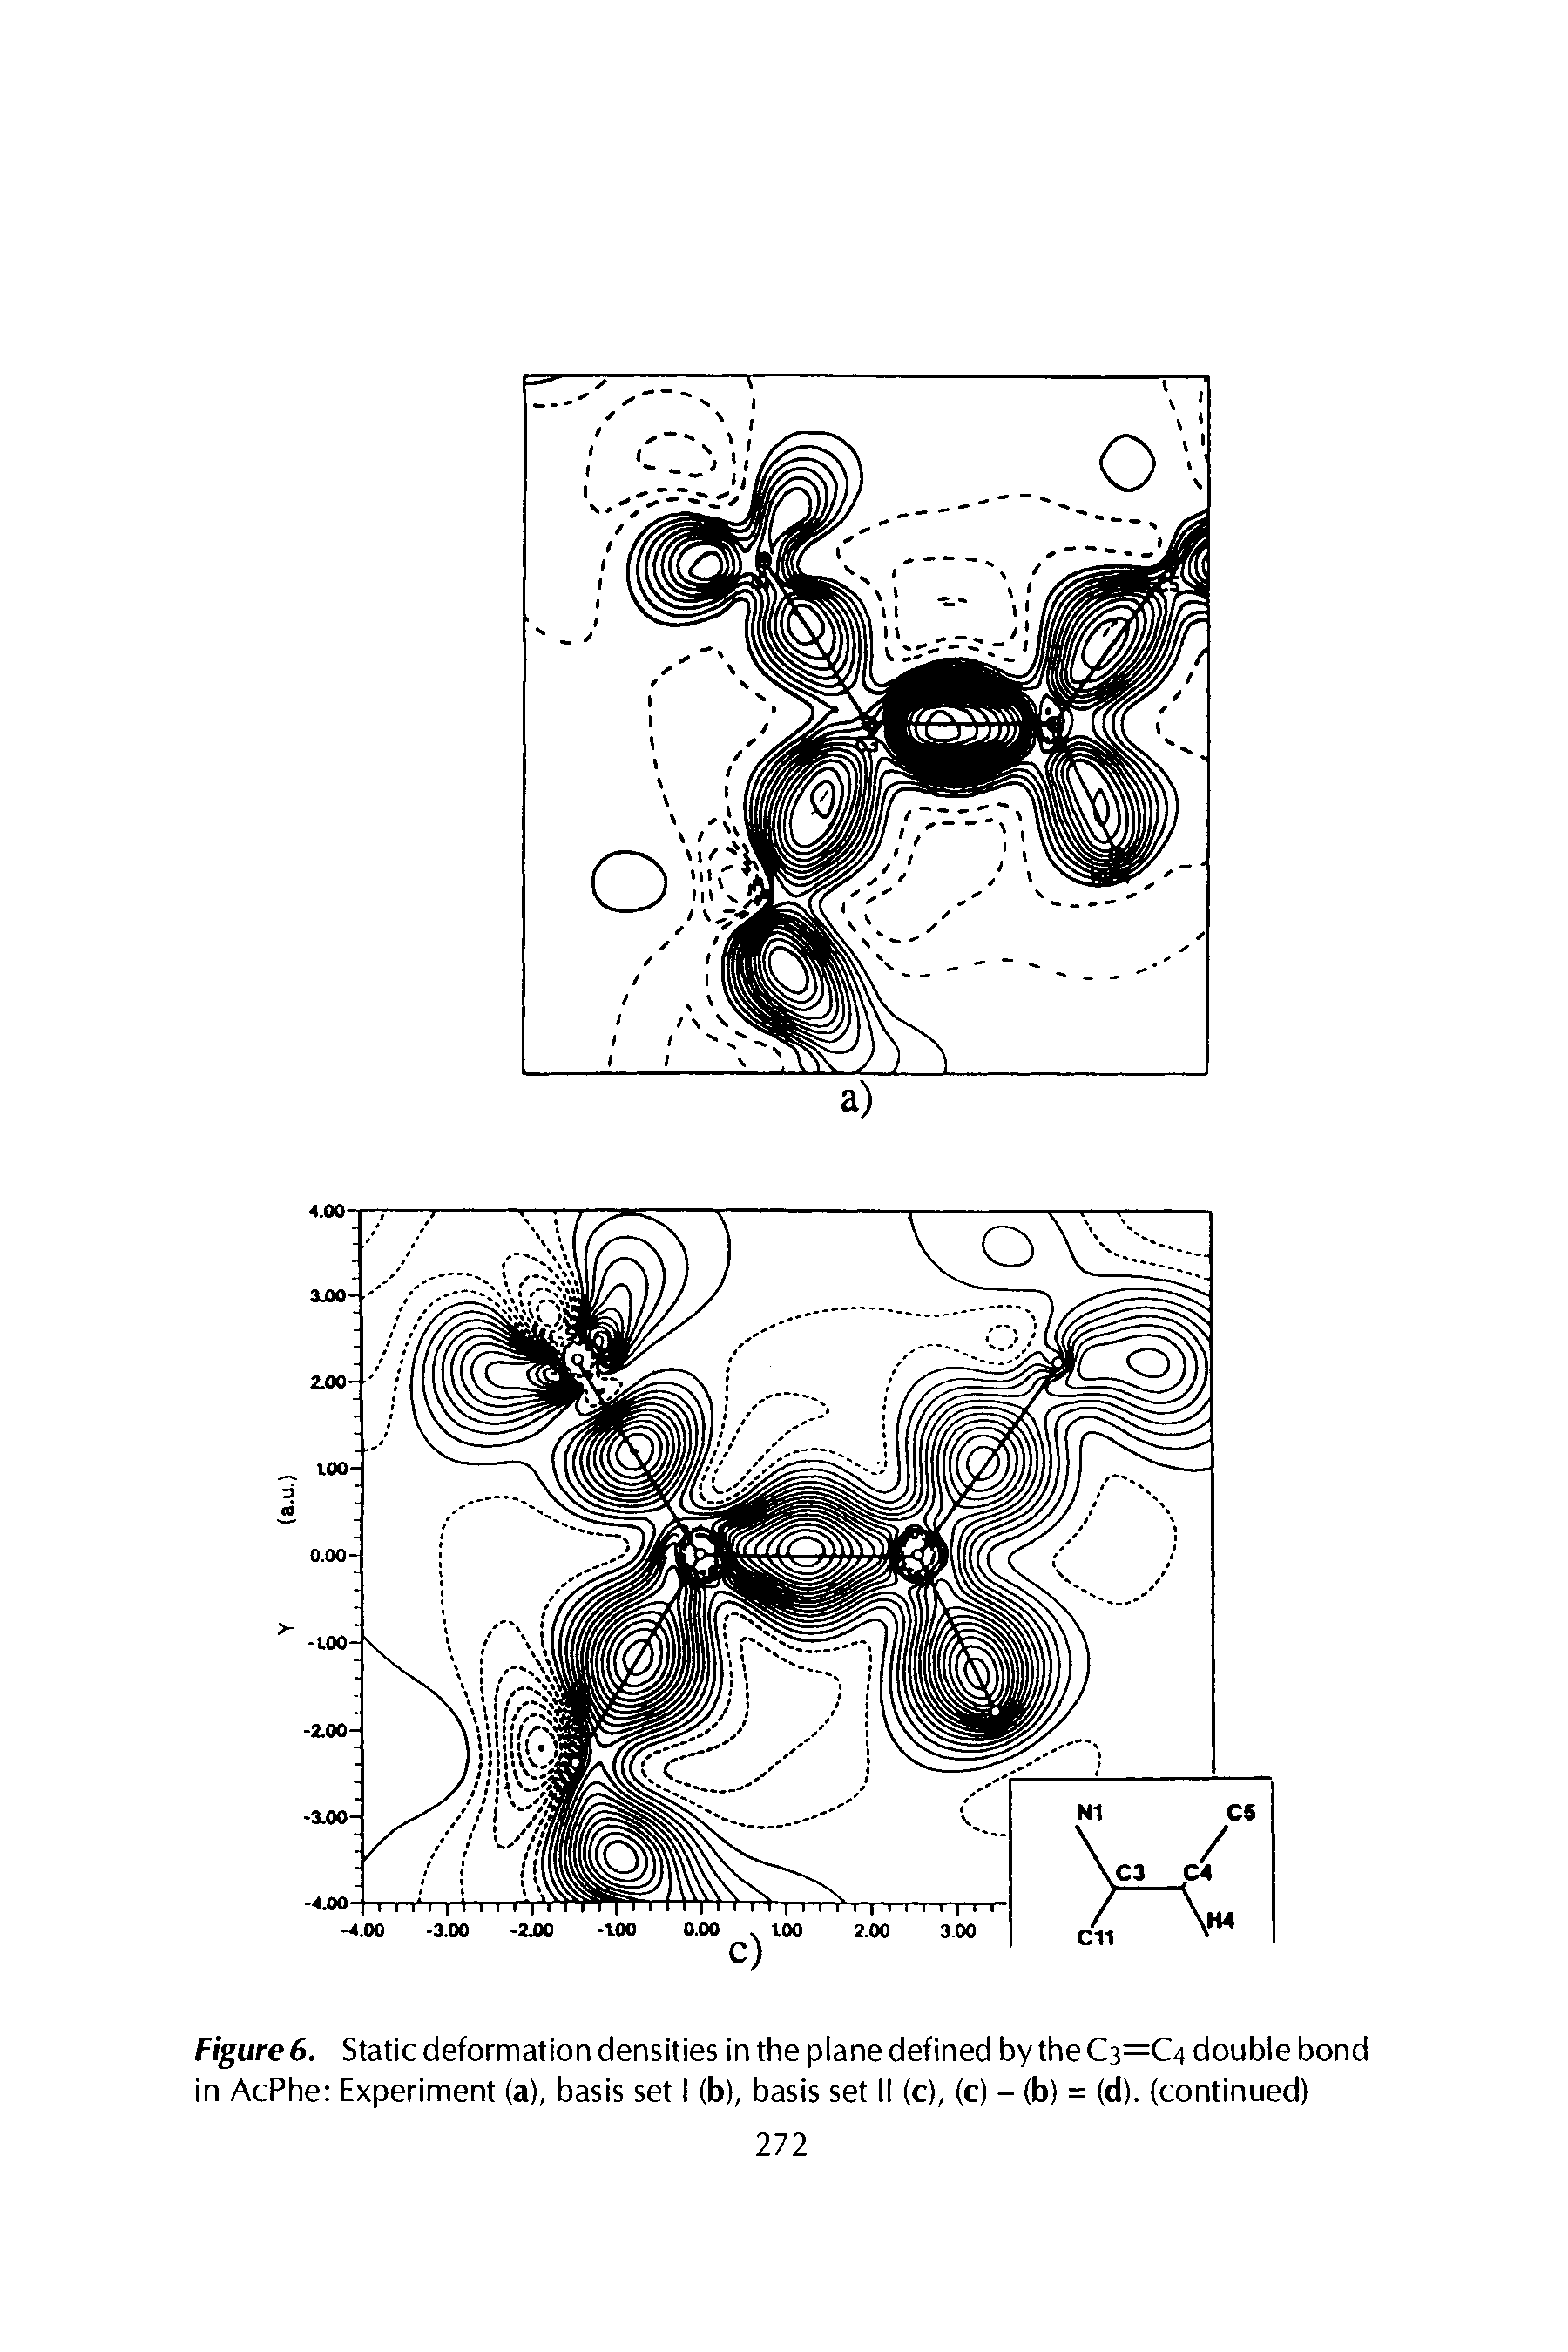 Figure 6. Static deformation densities in the plane defined by the C3=C4 double bond in AcPhe Experiment (a), basis set I (b), basis set II (c), (c) - (b) = (d). (continued)...